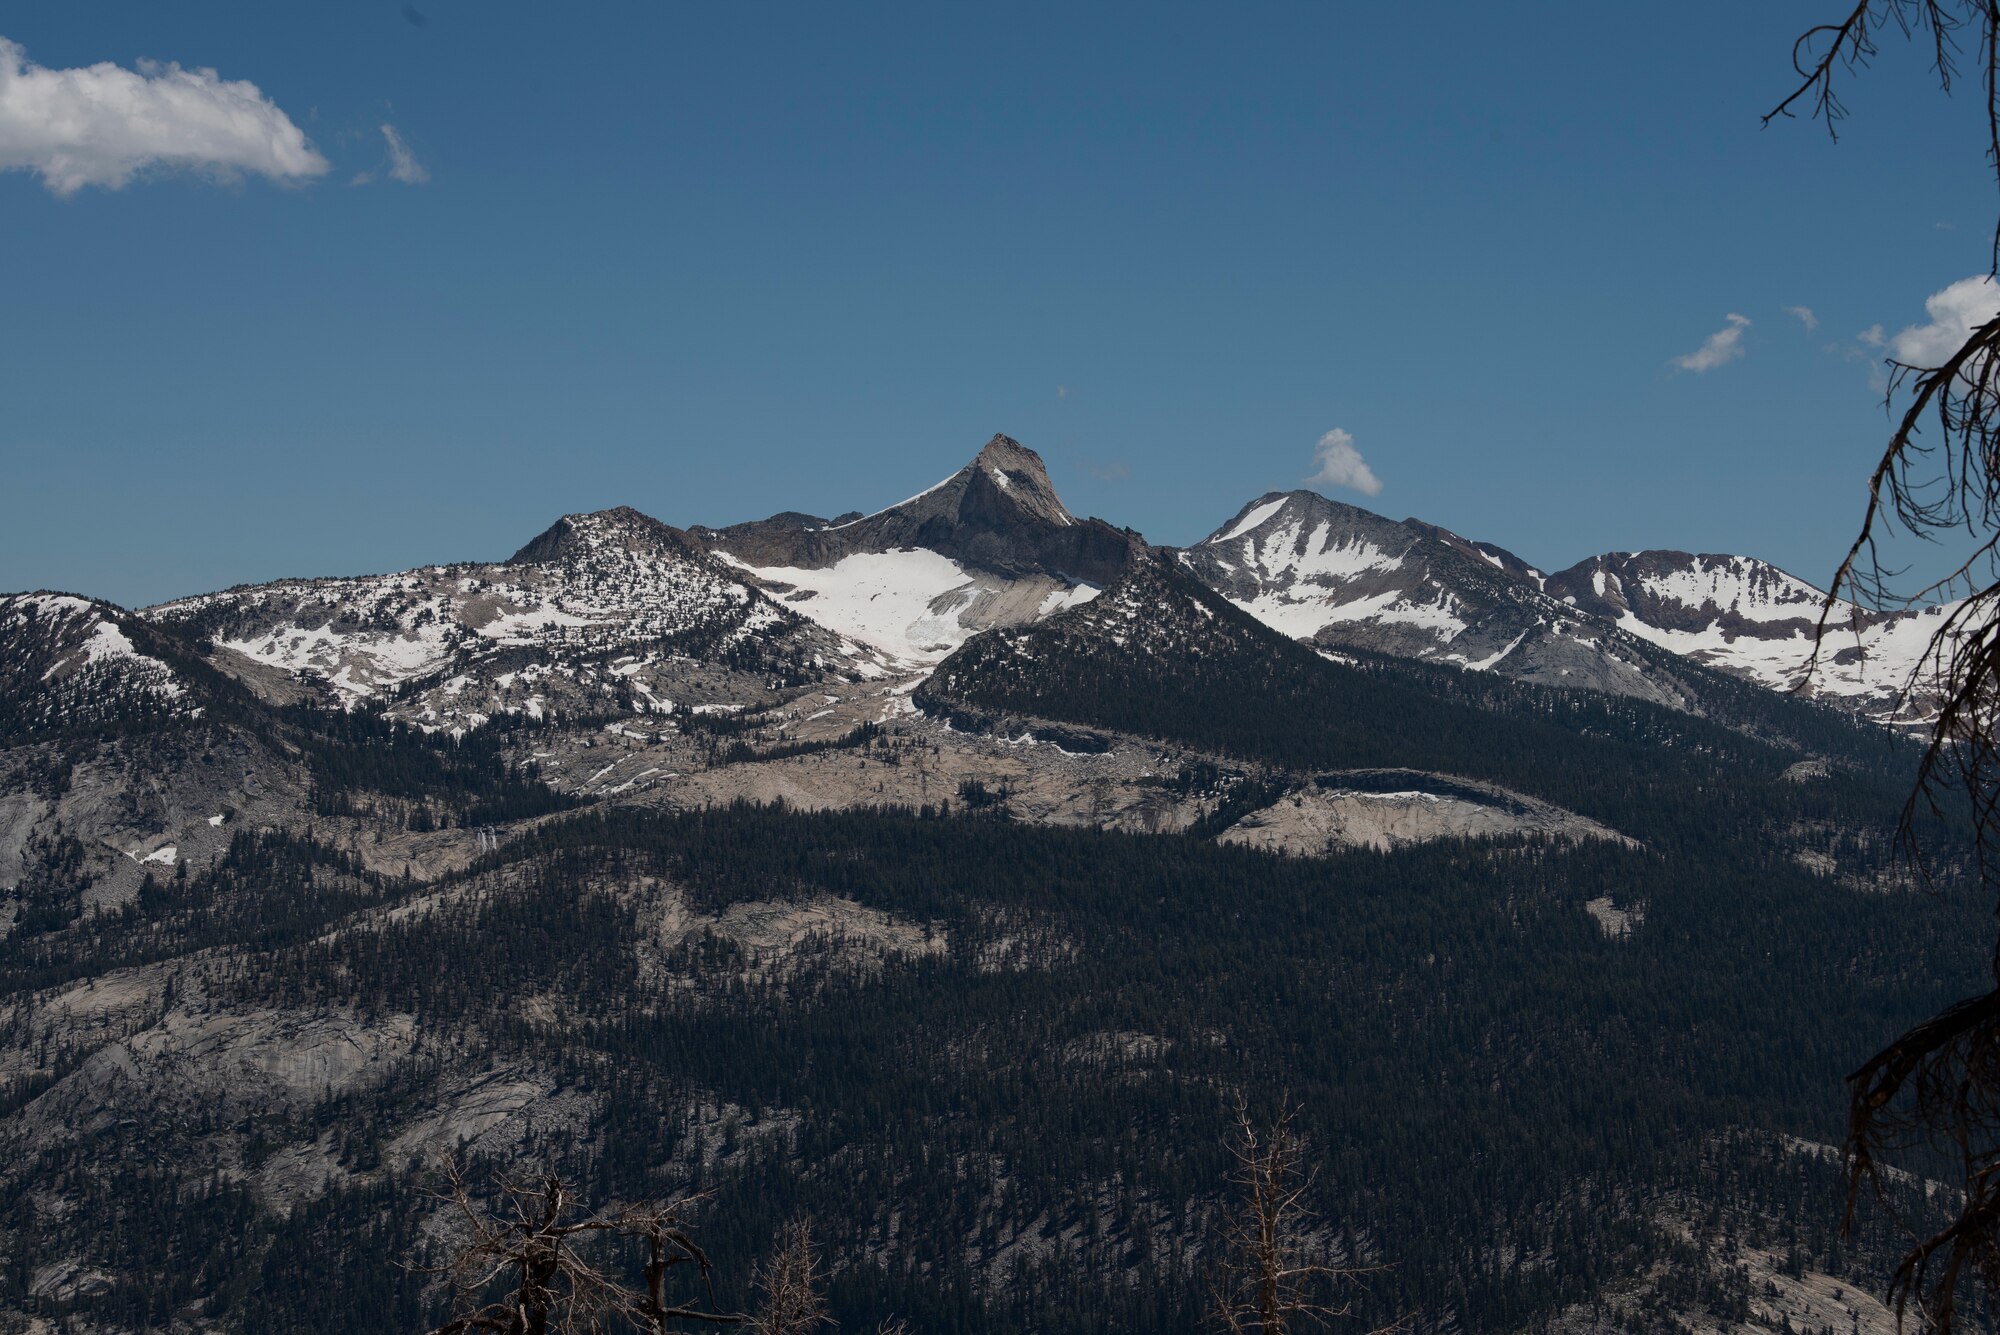 Several peaks and valleys are visible along the route of the trail leading to Cloud’s Rest July 13, 2019, at Yosemite National Park, California. Nearly four dozen Airmen from Travis Air Force Base, California, hiked to Cloud’s Rest covering 14.57 miles as they climbed to 9,926 feet above sea level. The hike was organized to enhance the Airmen’s physical, mental and spiritual resiliency. (U.S. Air Fore photo by Tech. Sgt. James Hodgman)